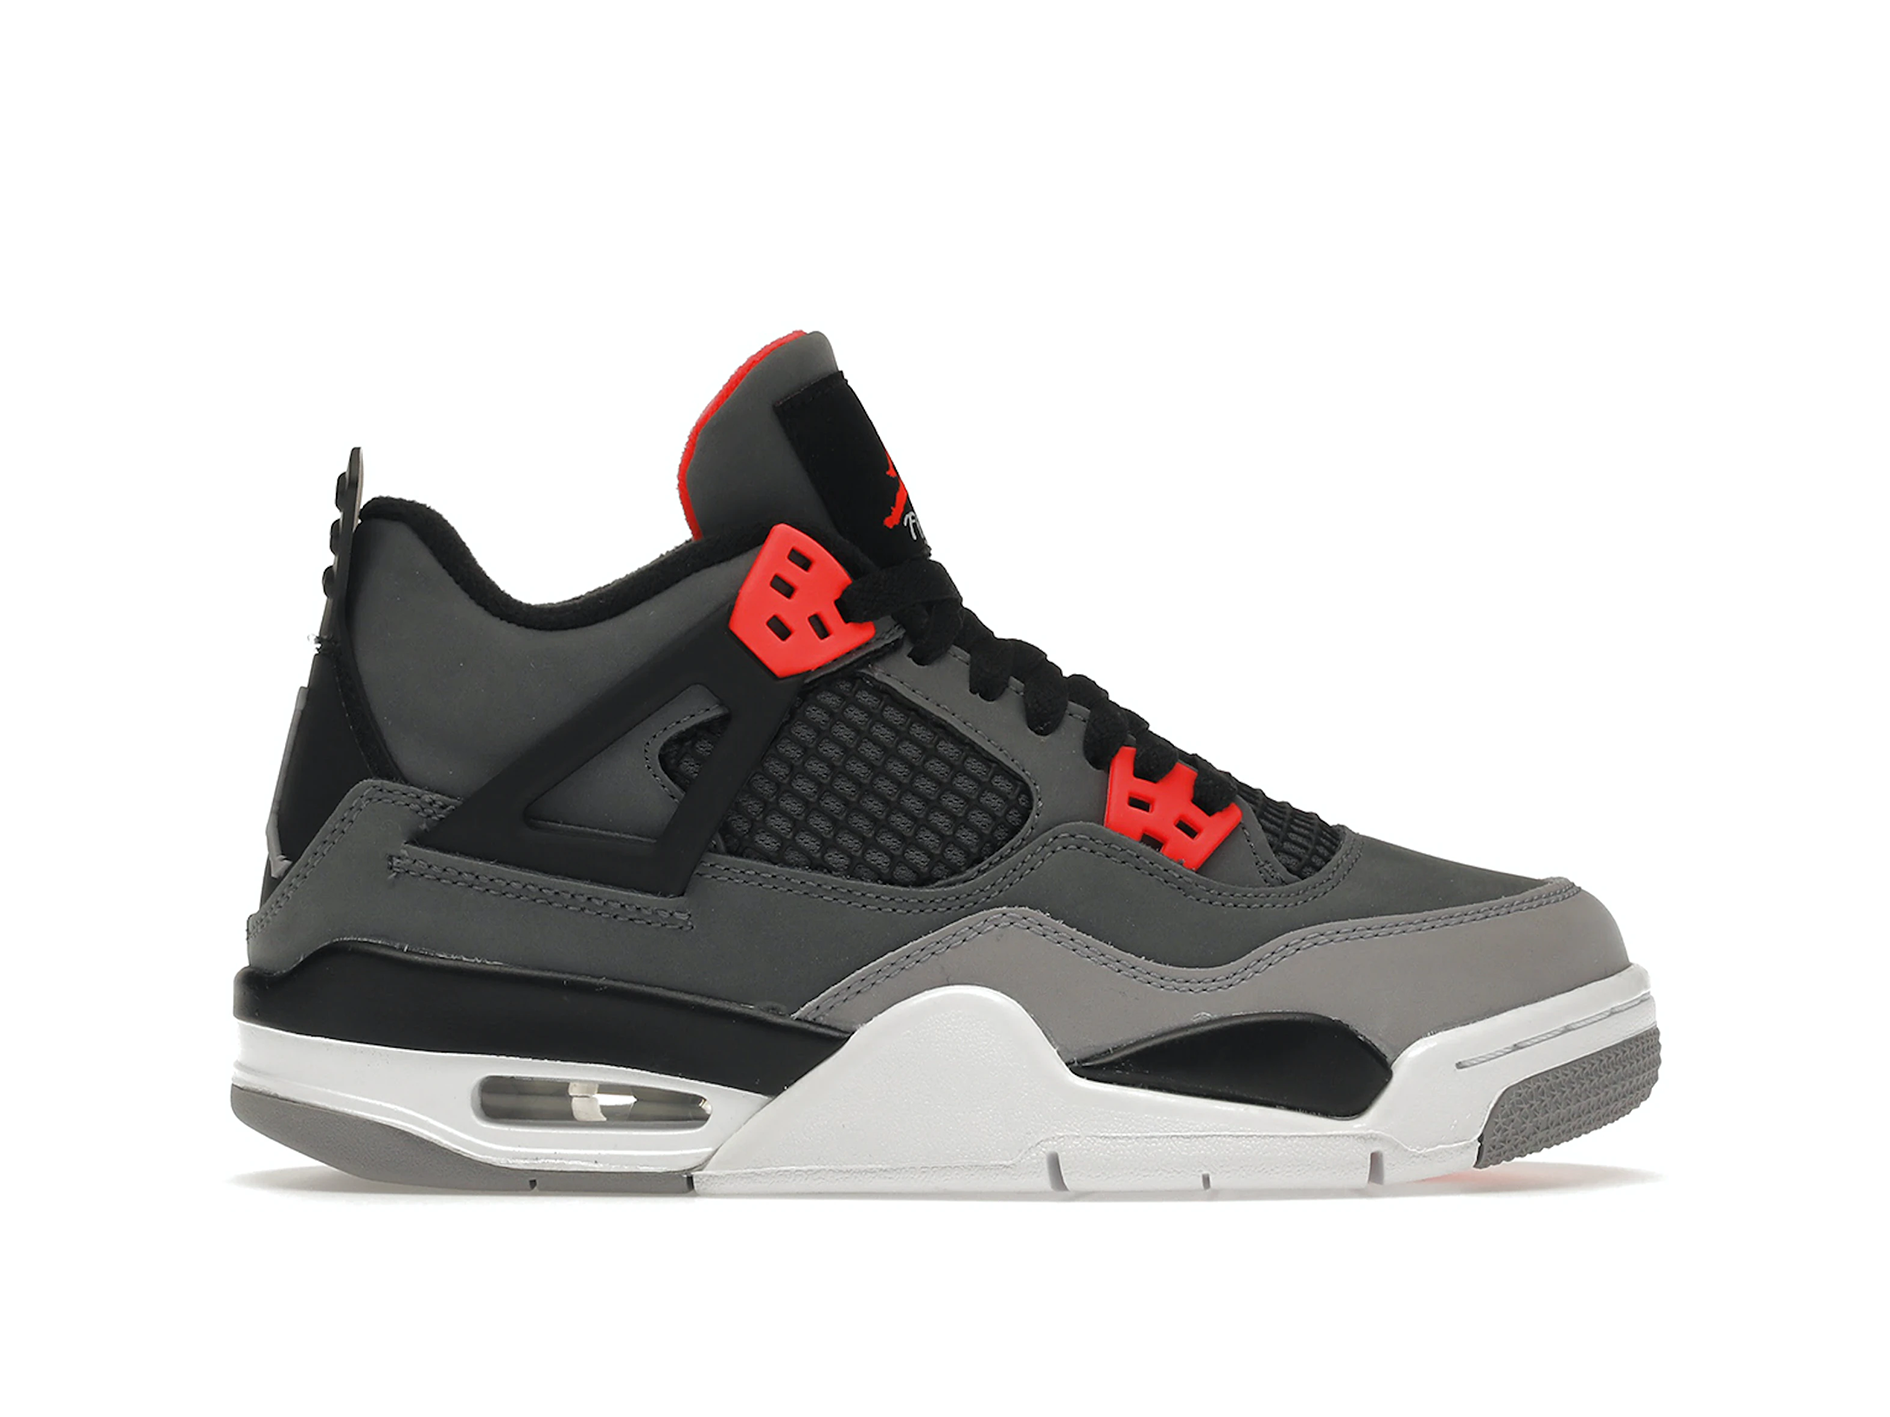 Double Boxed  274.99 Nike Air Jordan 4 Retro Infrared (GS) Double Boxed